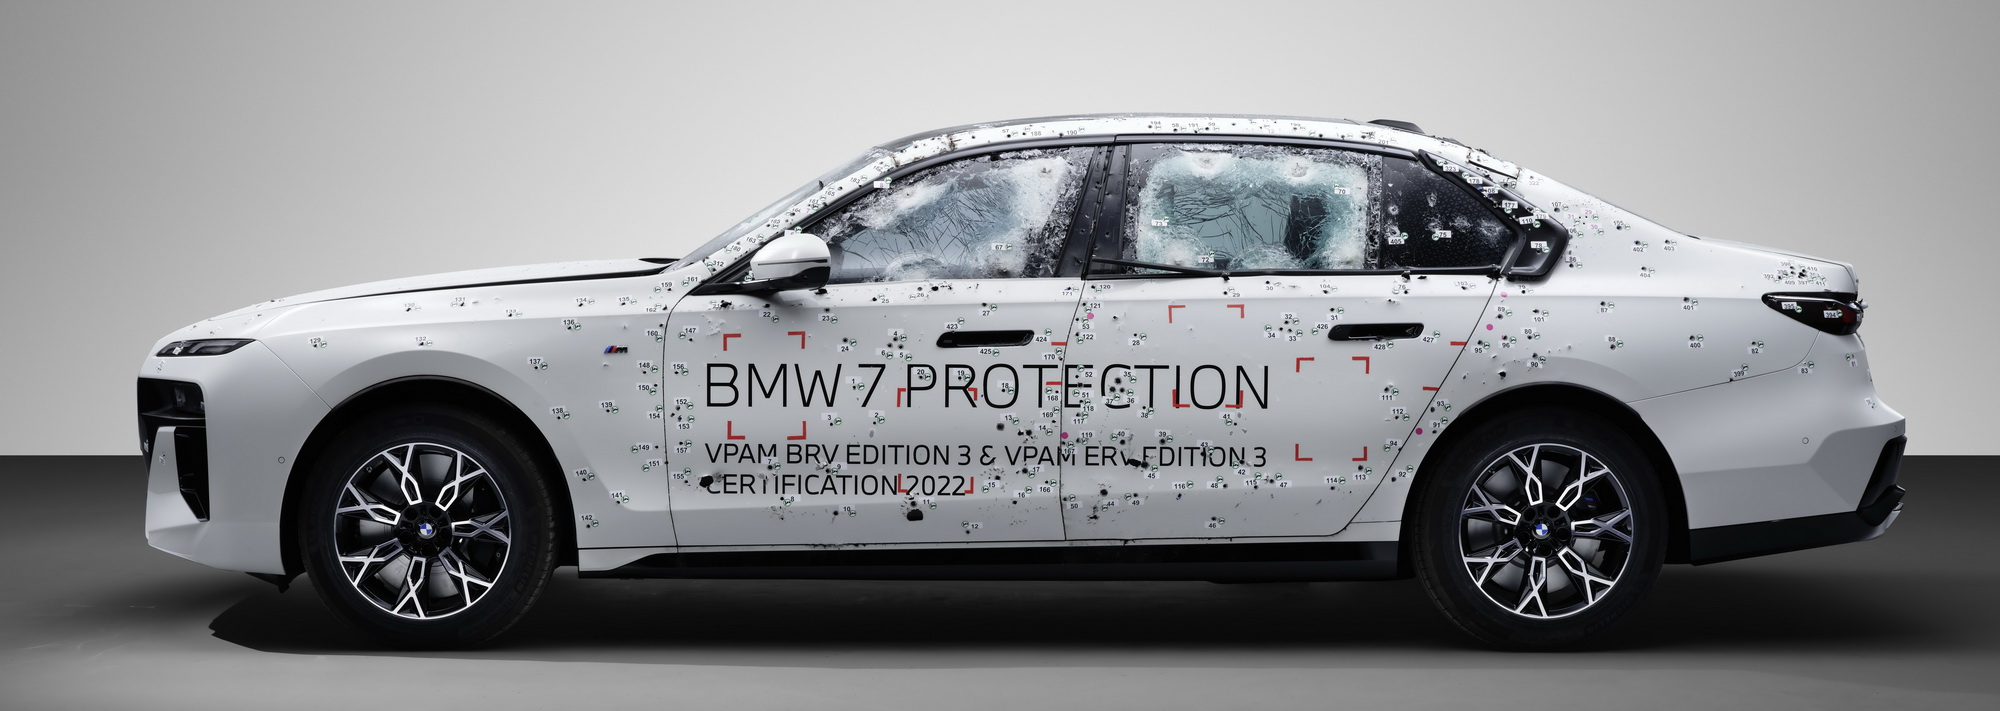 BMW i7 Protection, BMW 7 Series Protection